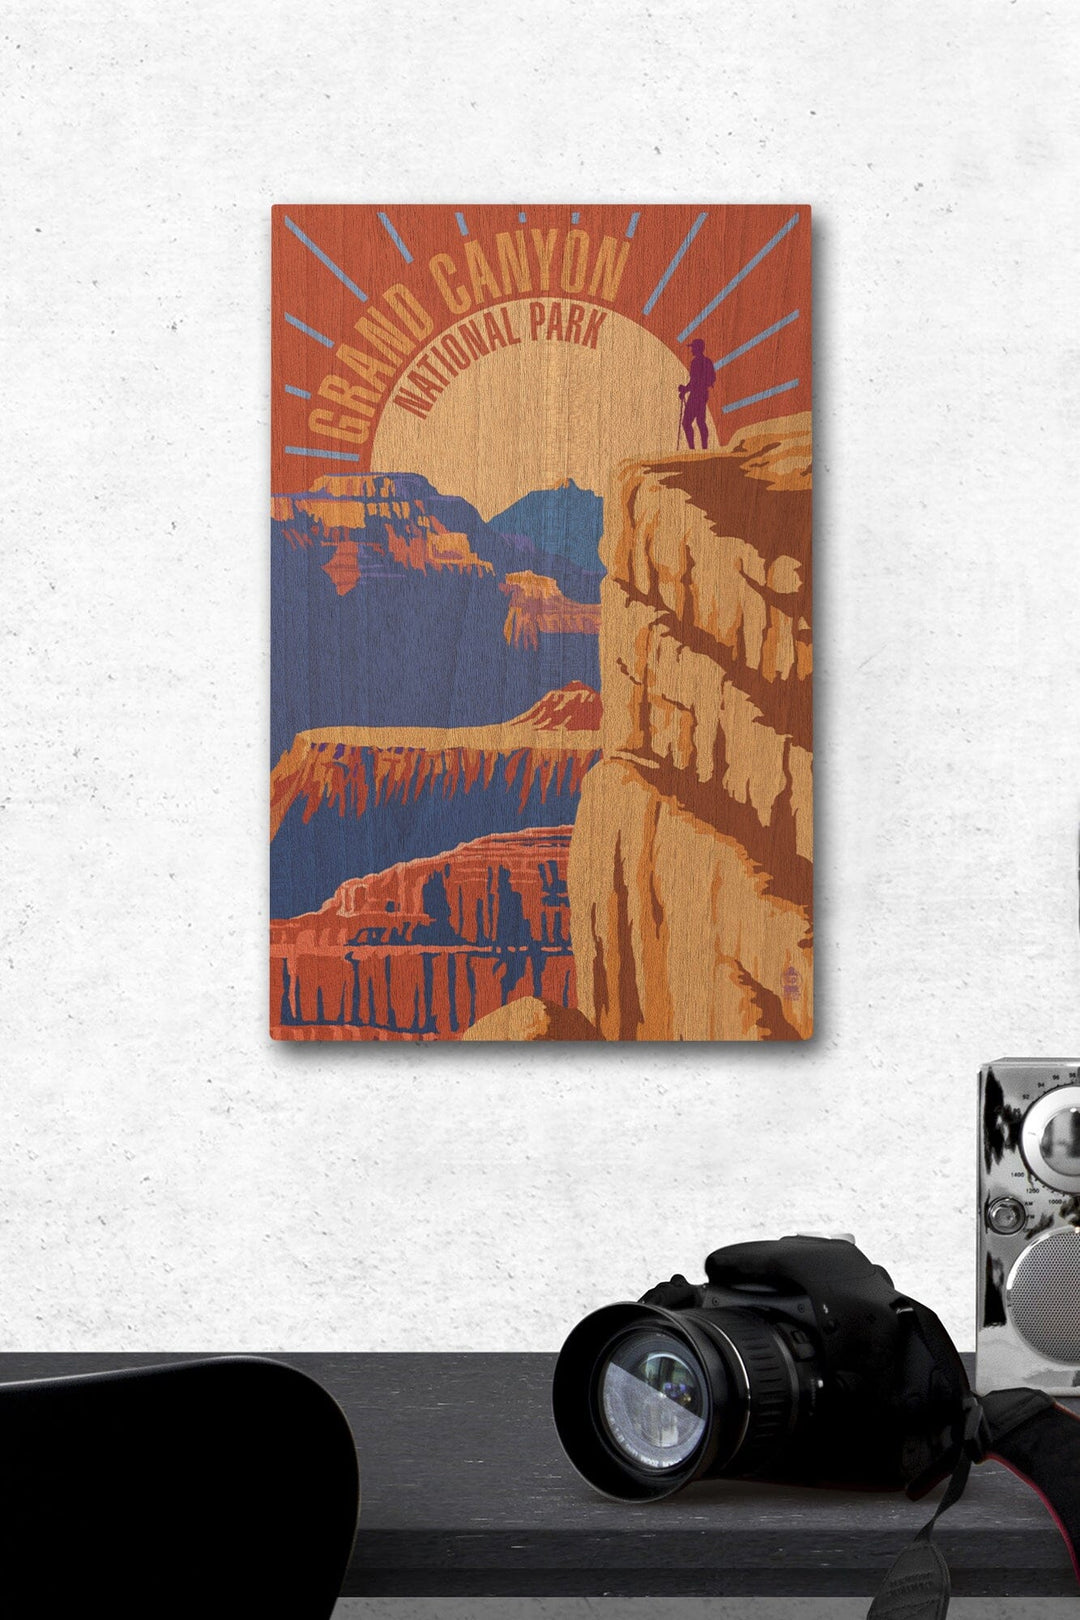 Hiker in Grand Canyon National Park, Psychedelic, Lantern Press Artwork, Wood Signs and Postcards Wood Lantern Press 12 x 18 Wood Gallery Print 